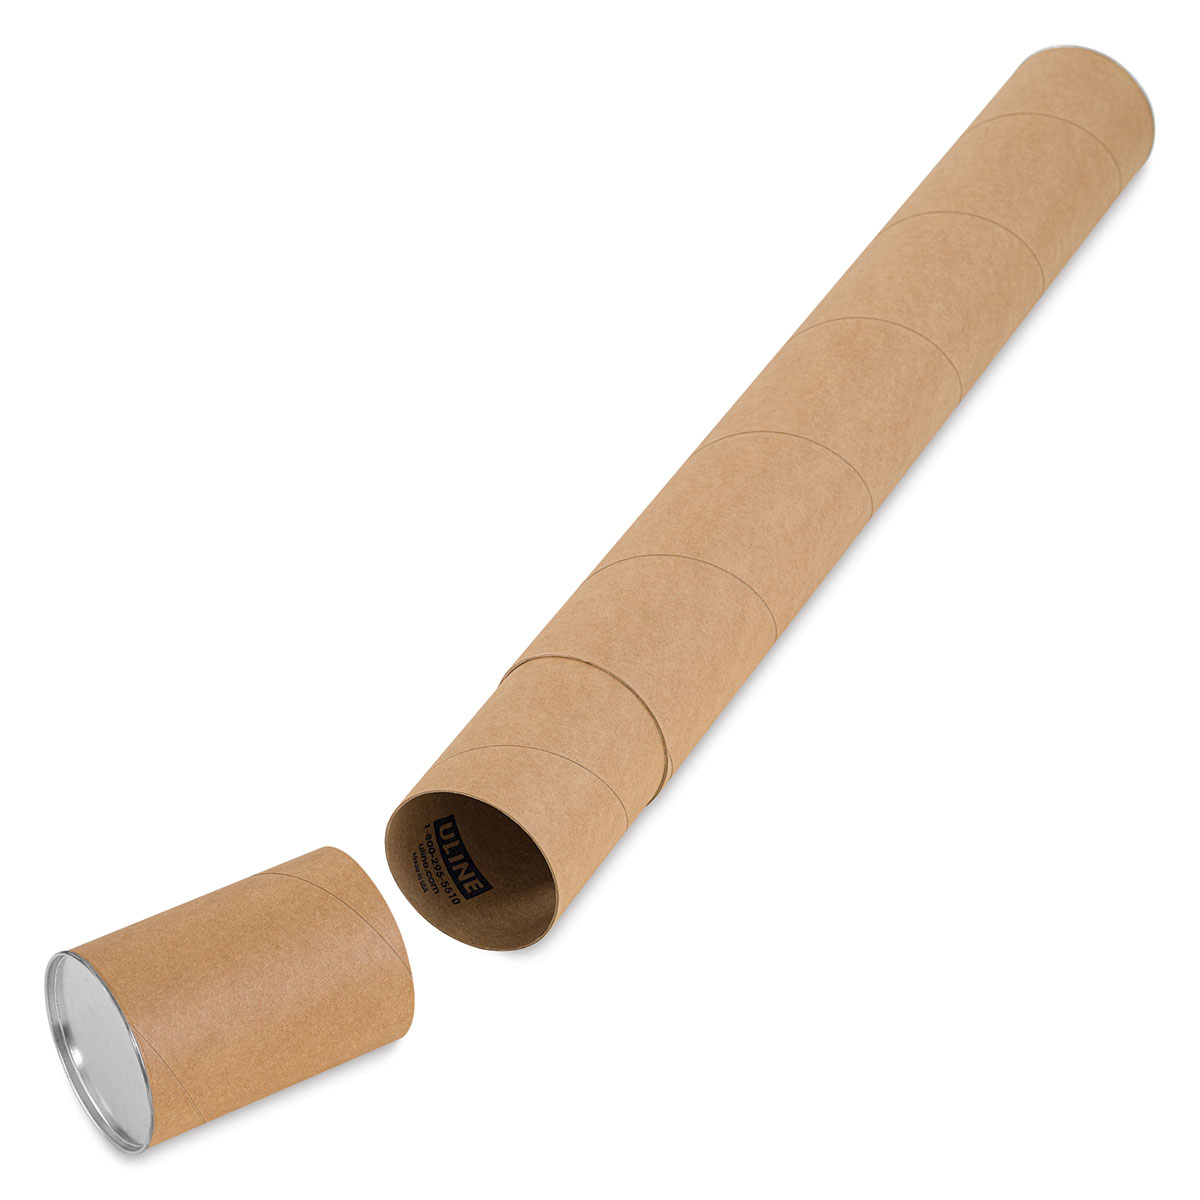 3 x 36 Kraft Heavy-Duty Mailing Tubes with Caps Case/24